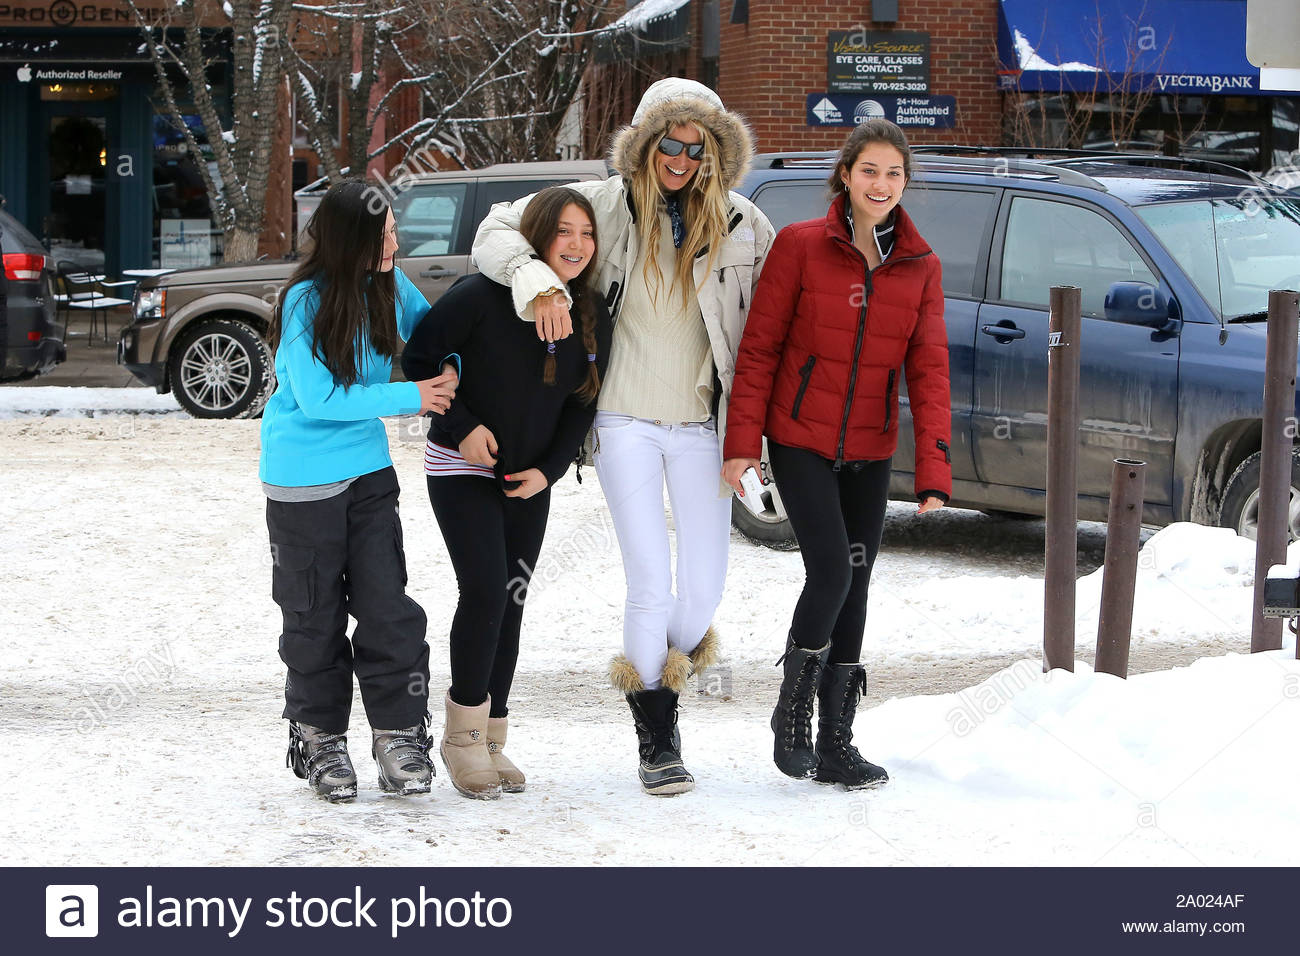 Aspen, CO - Australian model and business women Elle Macpherson steps out  in Aspen with friends after spending Christmas in her home country of  Australia. Elle made a stop at the iPro